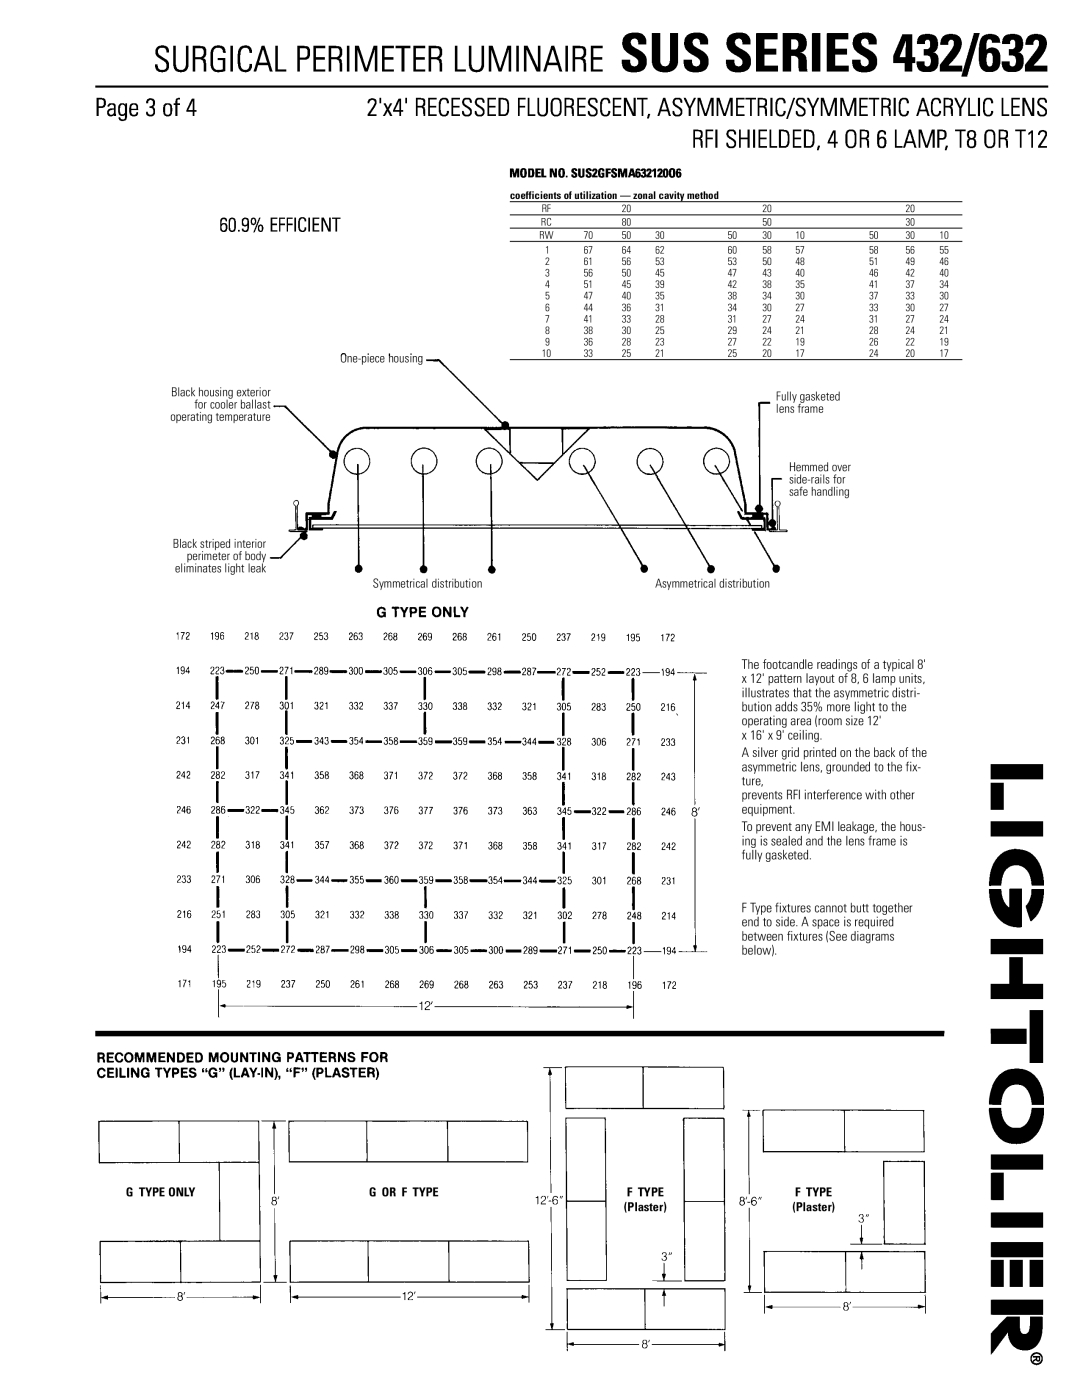 Lightolier Page 3 of, 60.9% EFFICIENT, SURGICAL PERIMETER LUMINAIRE SUS SERIES 432/632, x 16 x 9 ceiling, G Type Only 